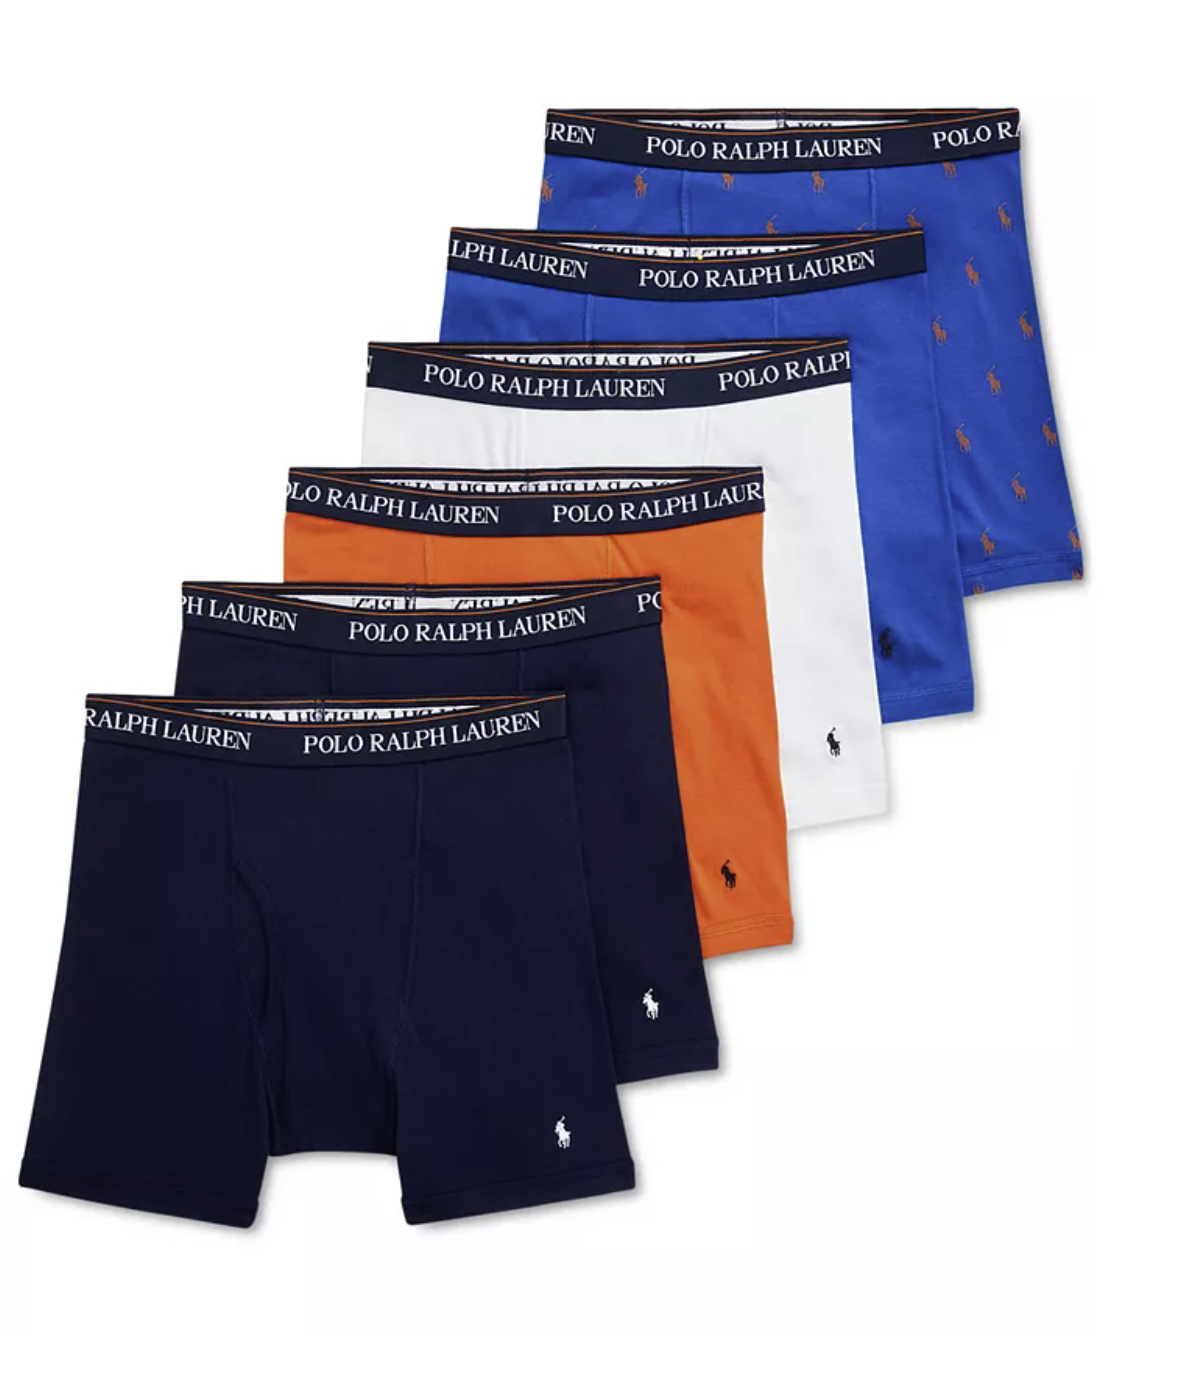 60% OFF the Polo Ralph Lauren Classic Boxer Briefs (6-Pack) — Sneaker ...